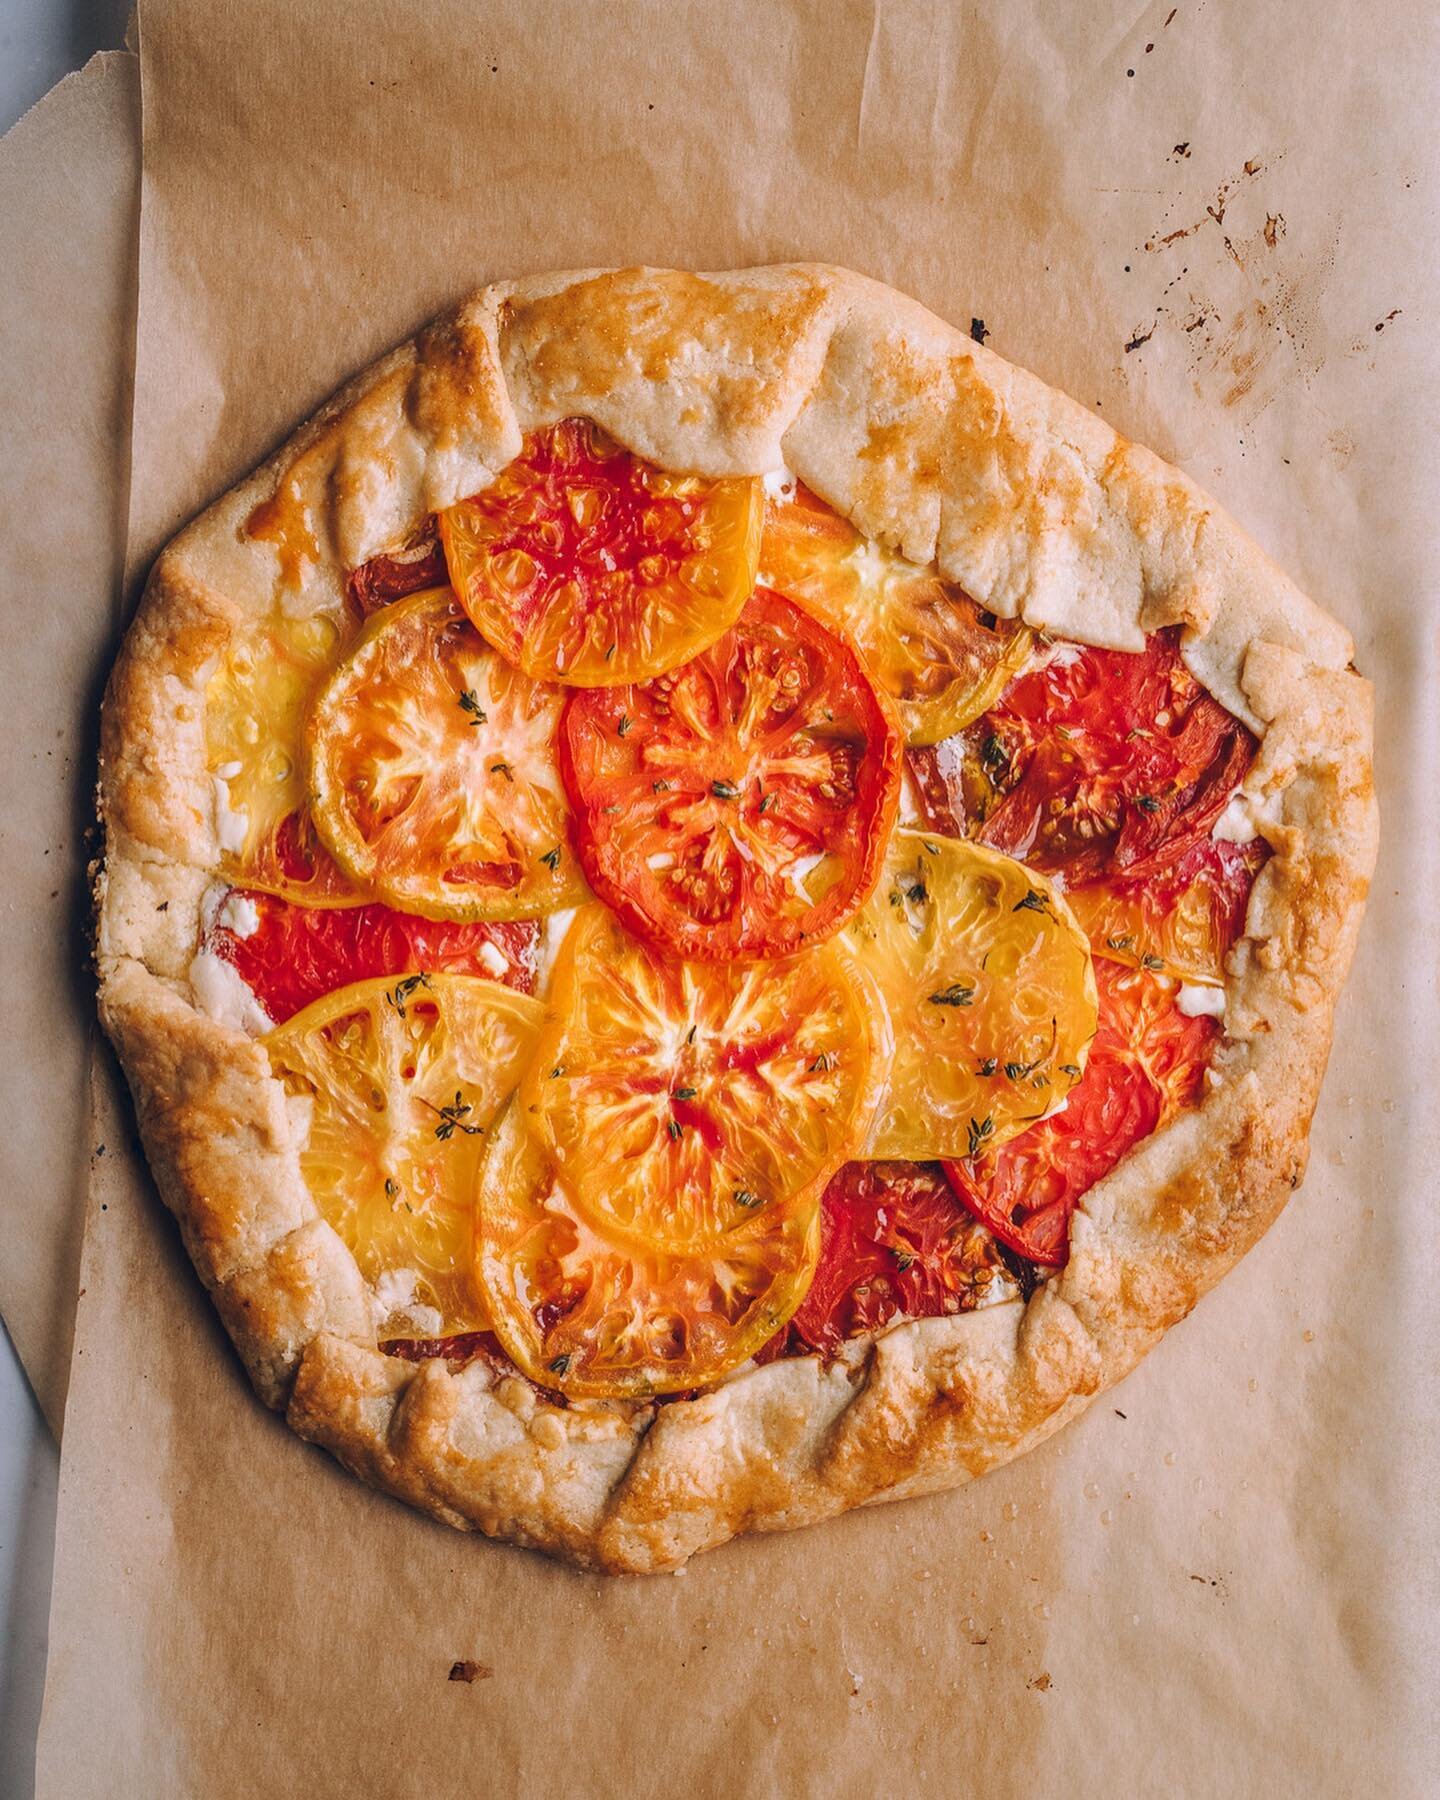 Heirloom Tomato Galette 🍅
⠀⠀⠀⠀⠀⠀⠀⠀⠀
While this galette may look like a pizza at first glance, the taste and texture completely different but equally delicious. Fresh herbs, juicy heirloom tomatoes, savory goat cheese filling, and flaky, buttery crus